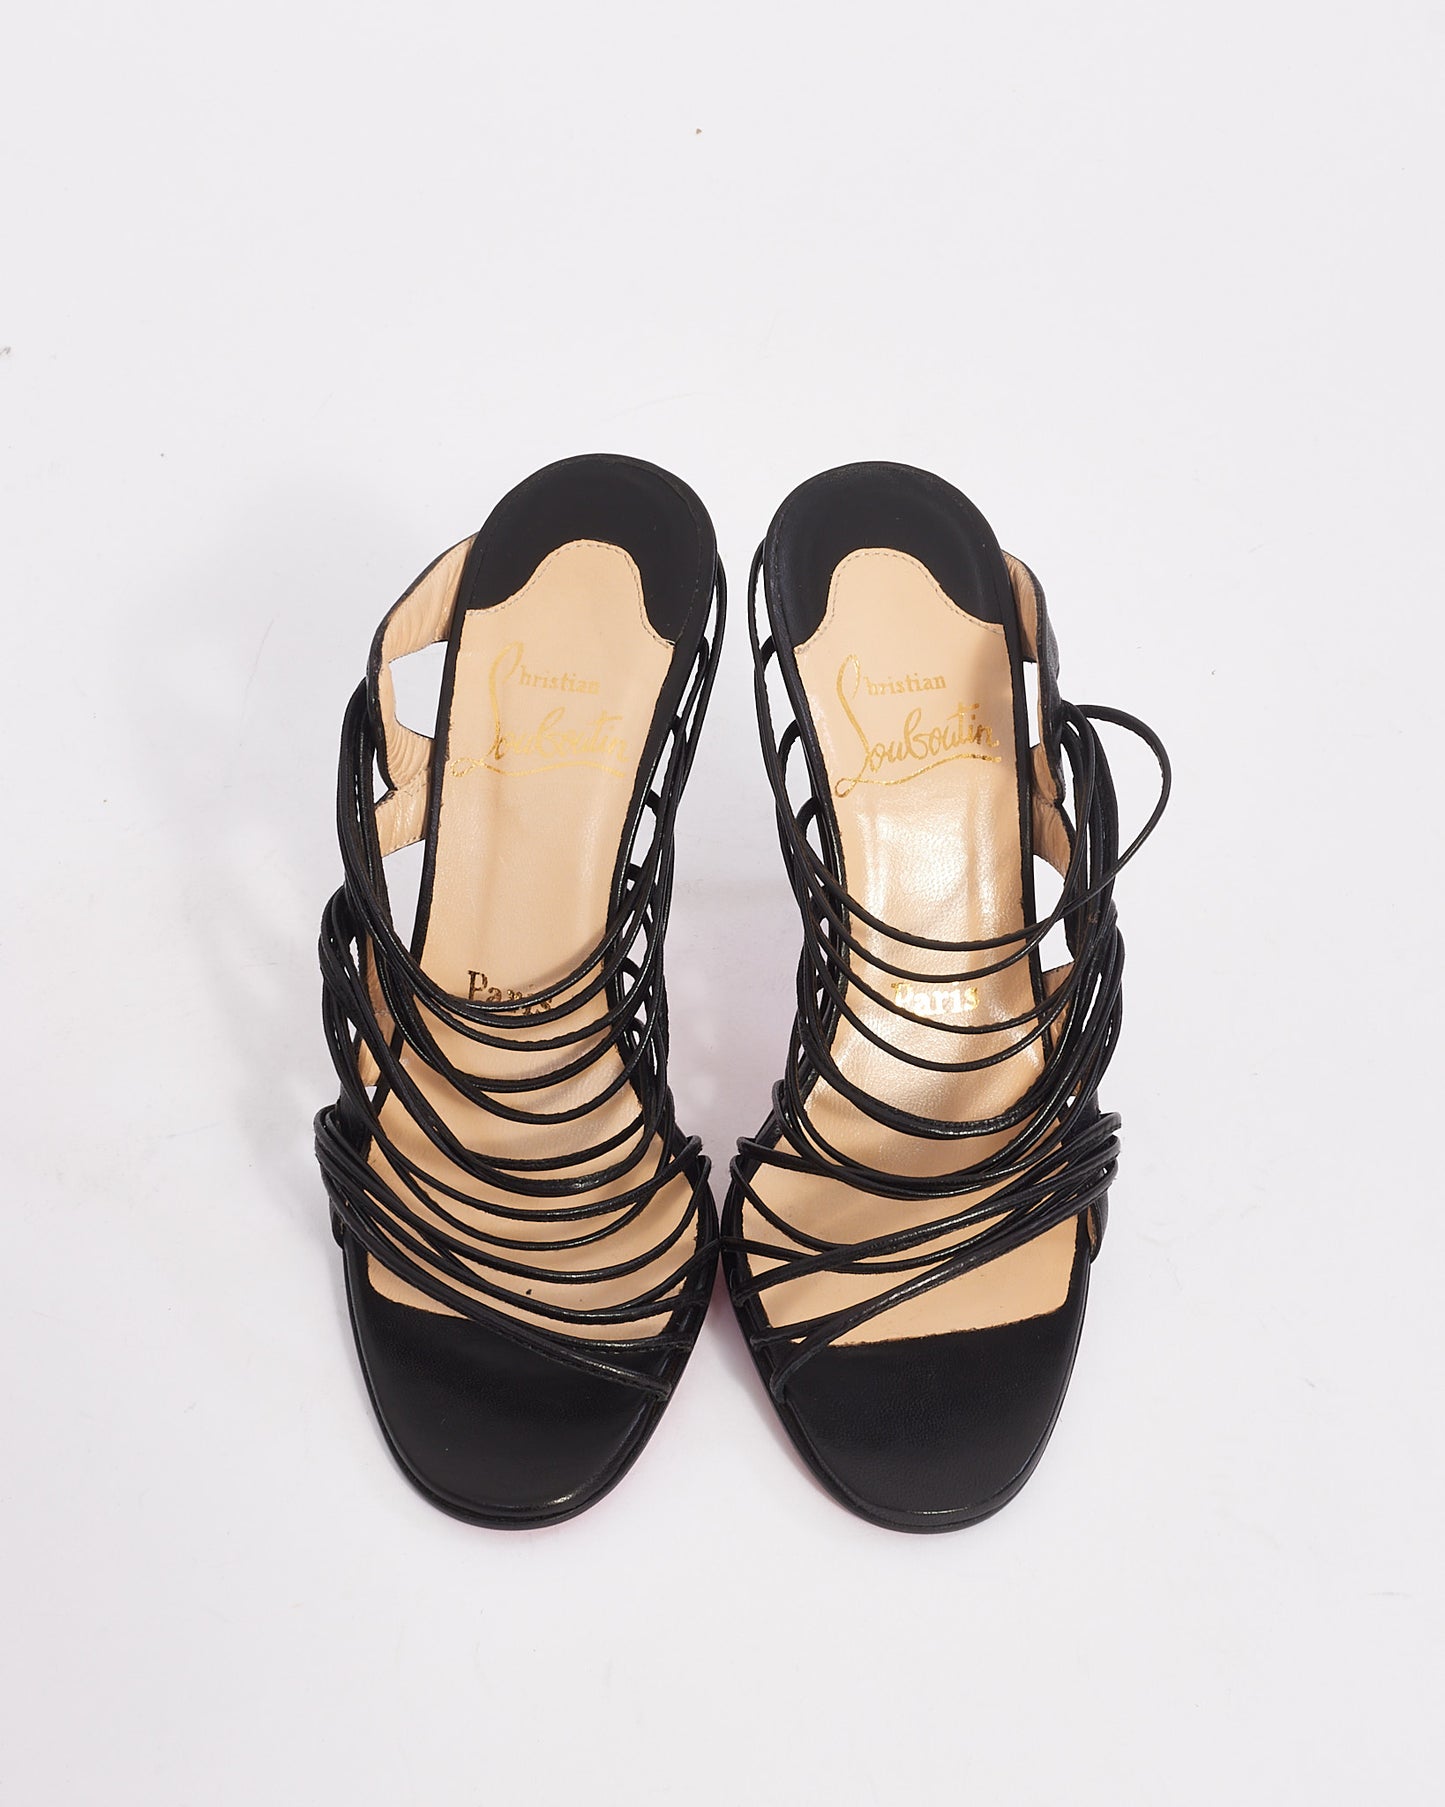 Christian Louboutin Black Leather Strappy Heeled Sandals - 36